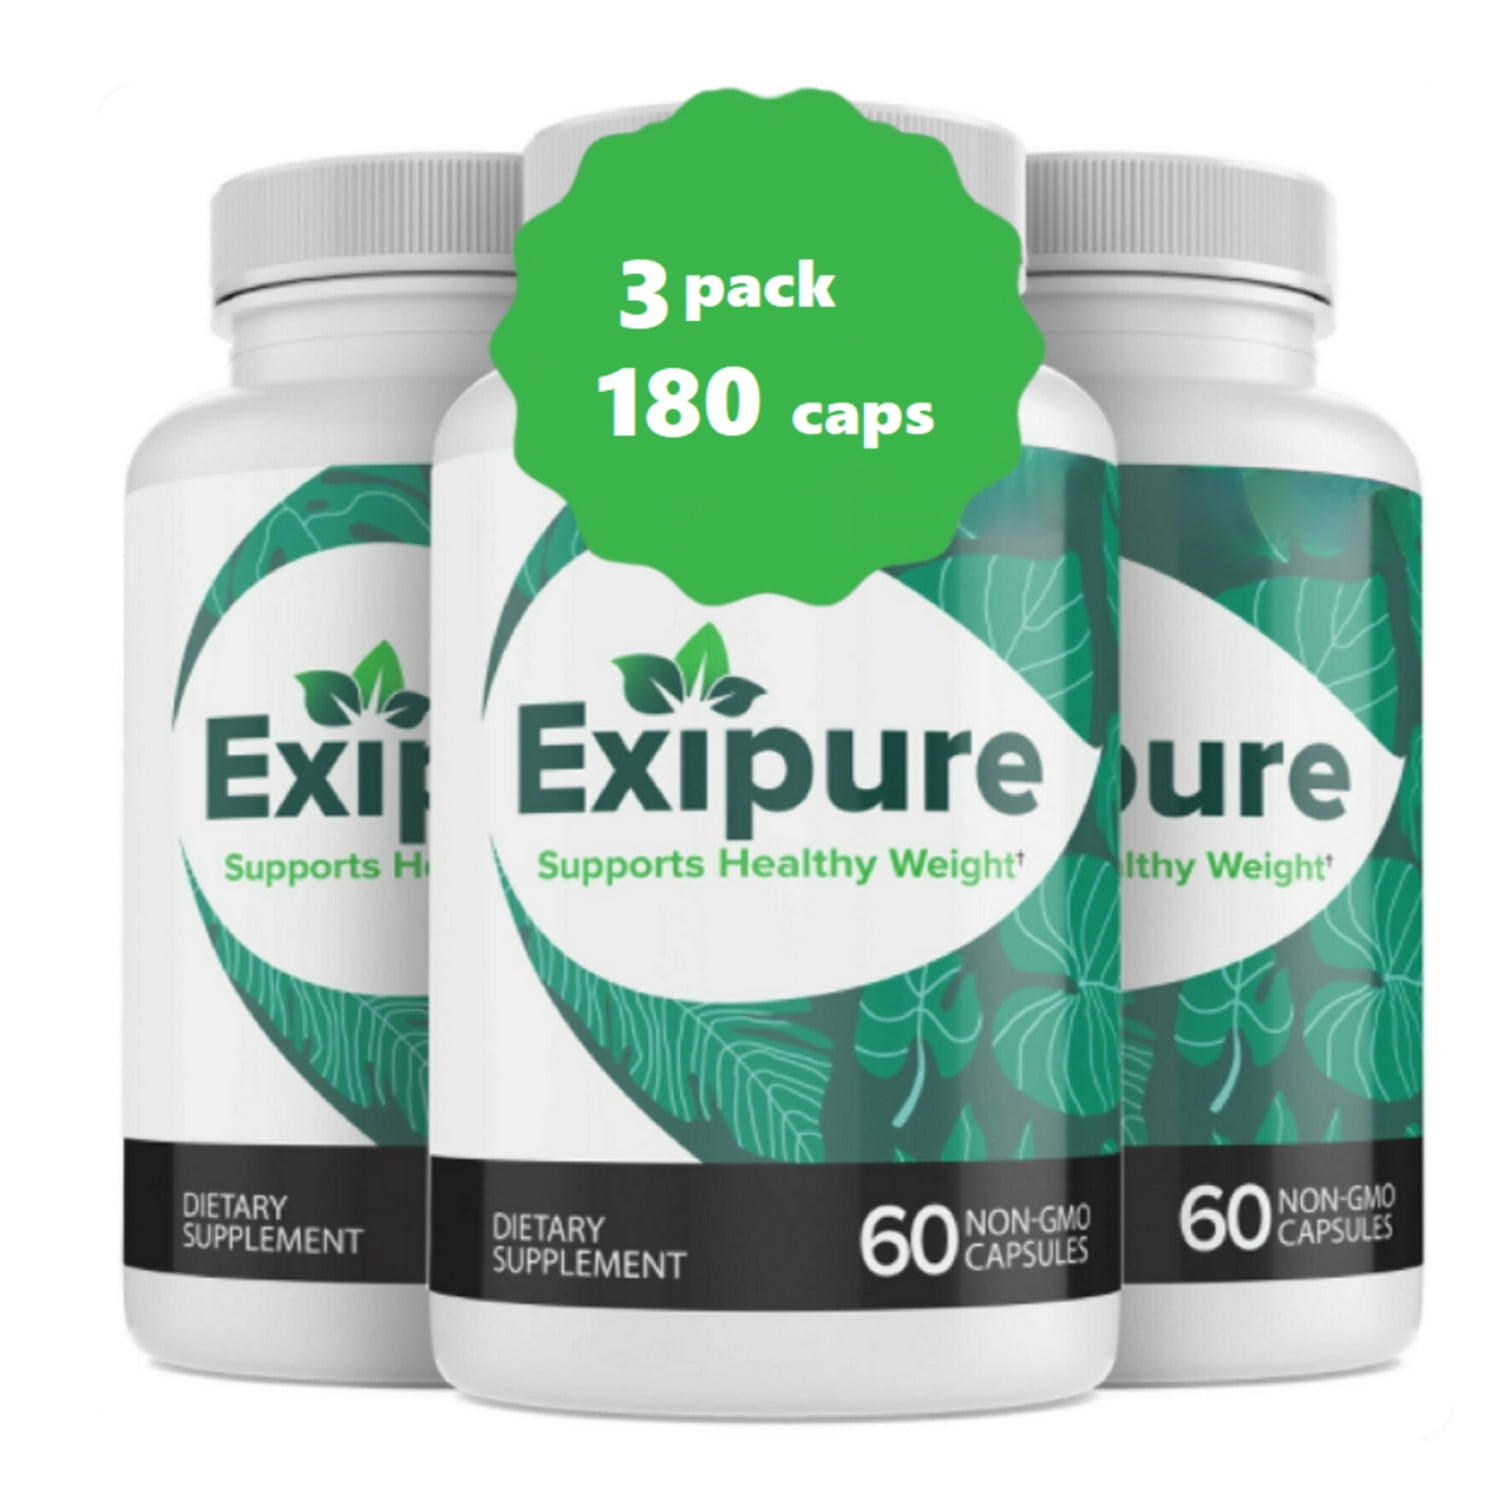 Exipure Reviews - Authentic Product Claims or Fake Customer Results? Auburn Reporter